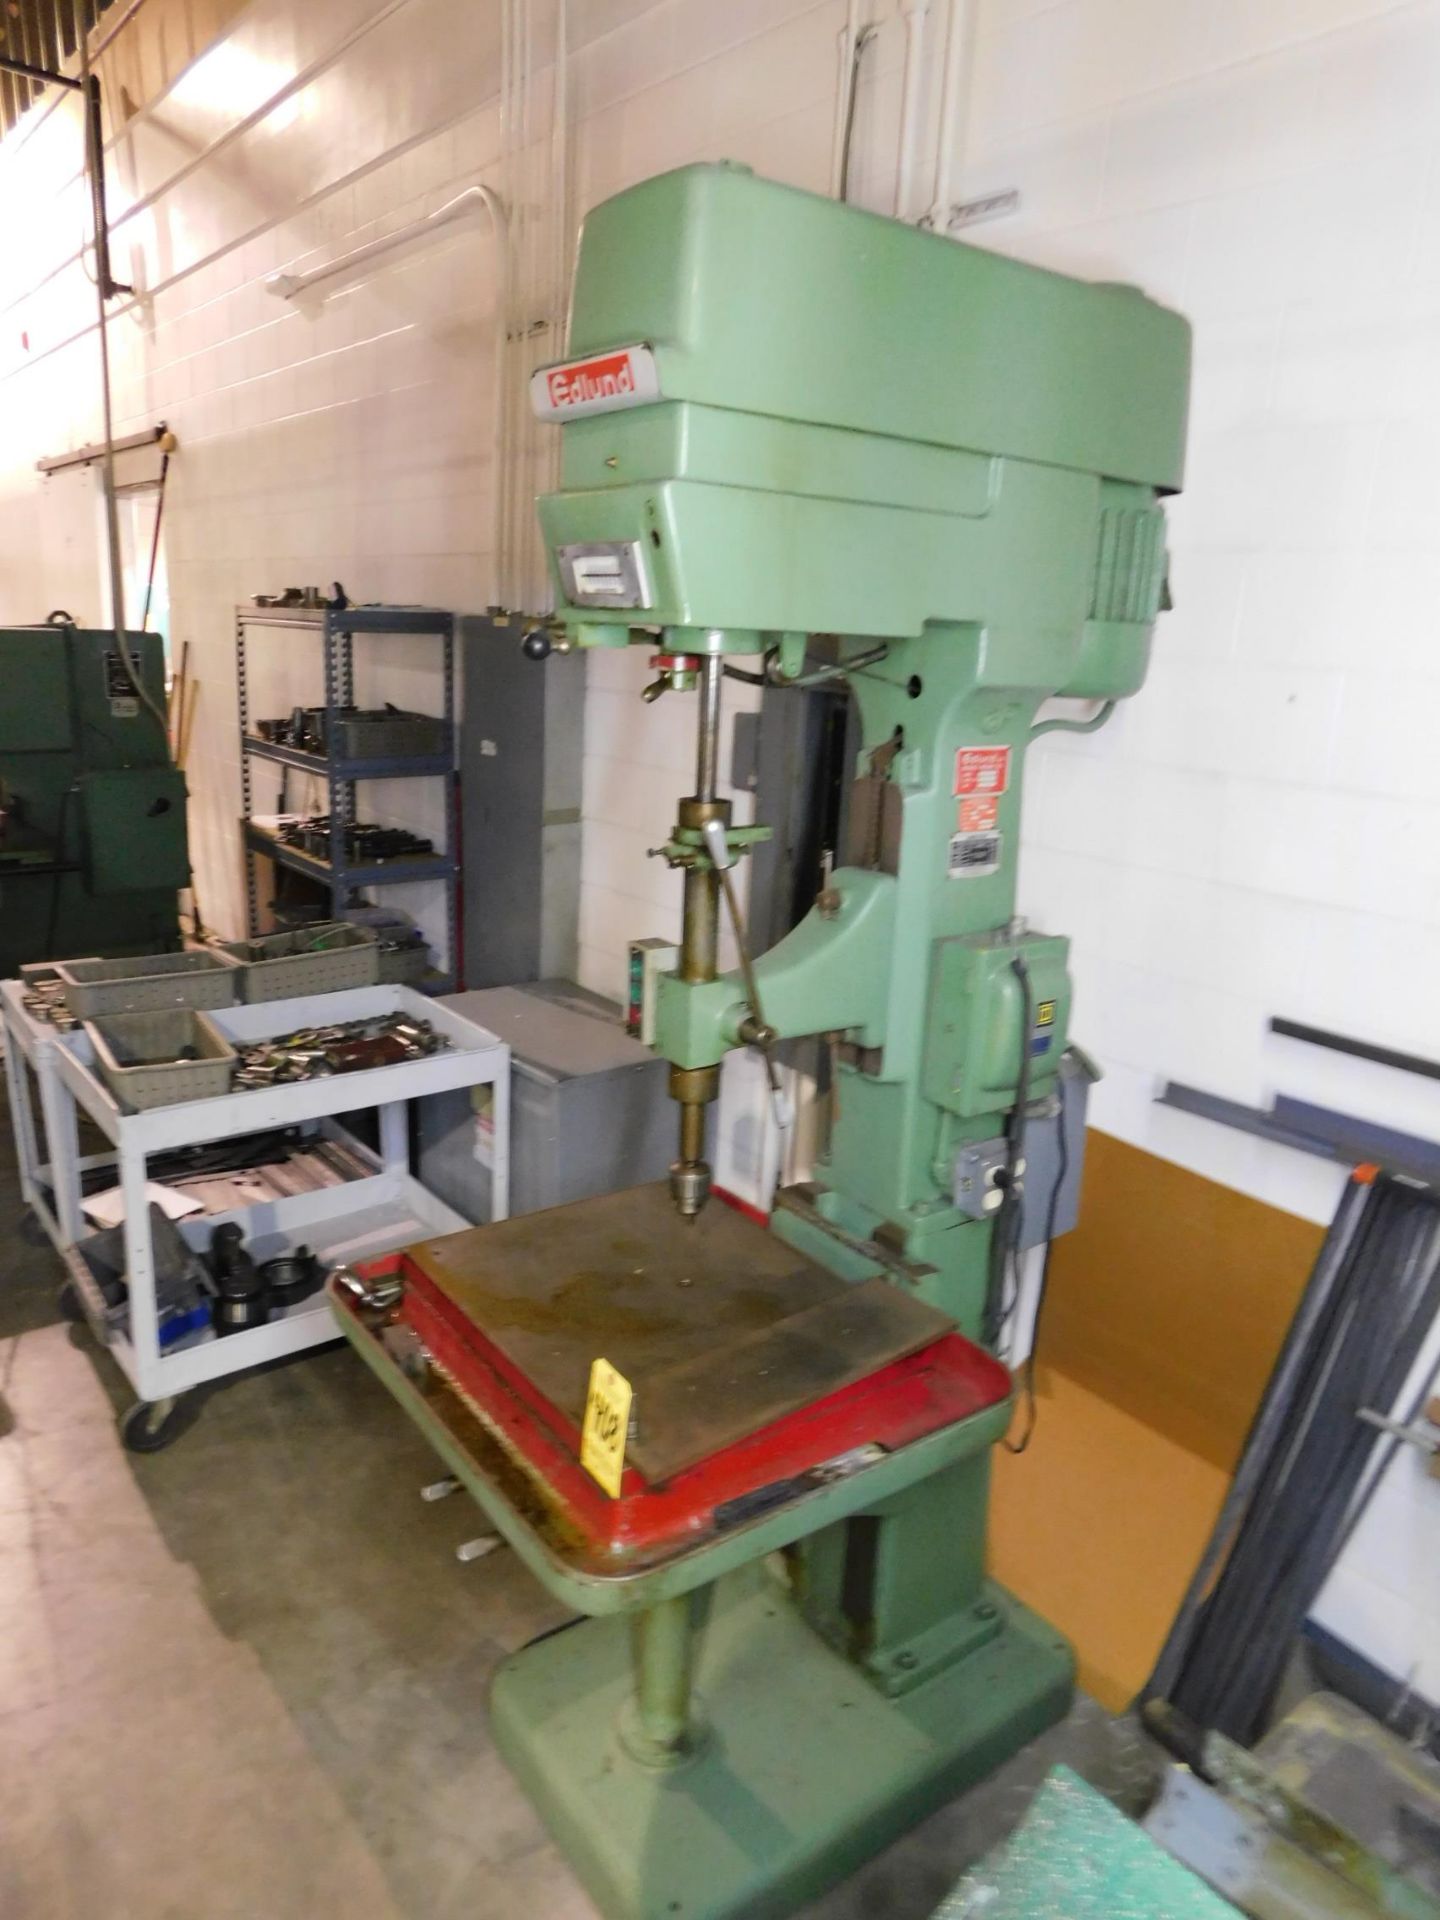 Edlund Model 2F-15 Single Spindle Drill Press, s/n 70310, 15" - Image 2 of 5